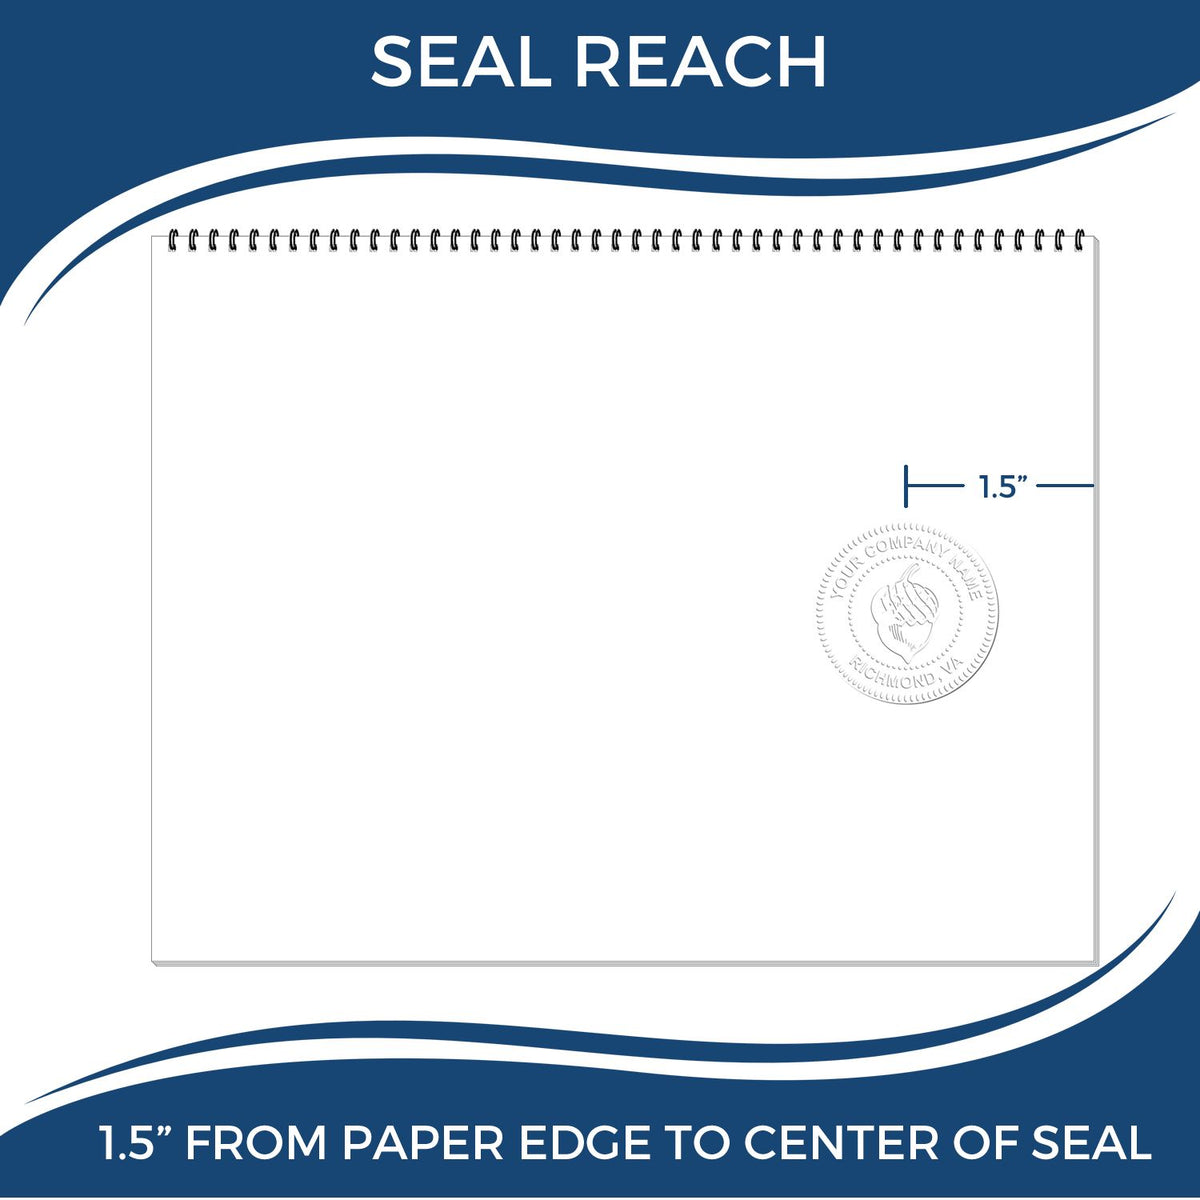 An infographic showing the seal reach which is represented by a ruler and a miniature seal image of the Soft Pocket Utah Landscape Architect Embosser